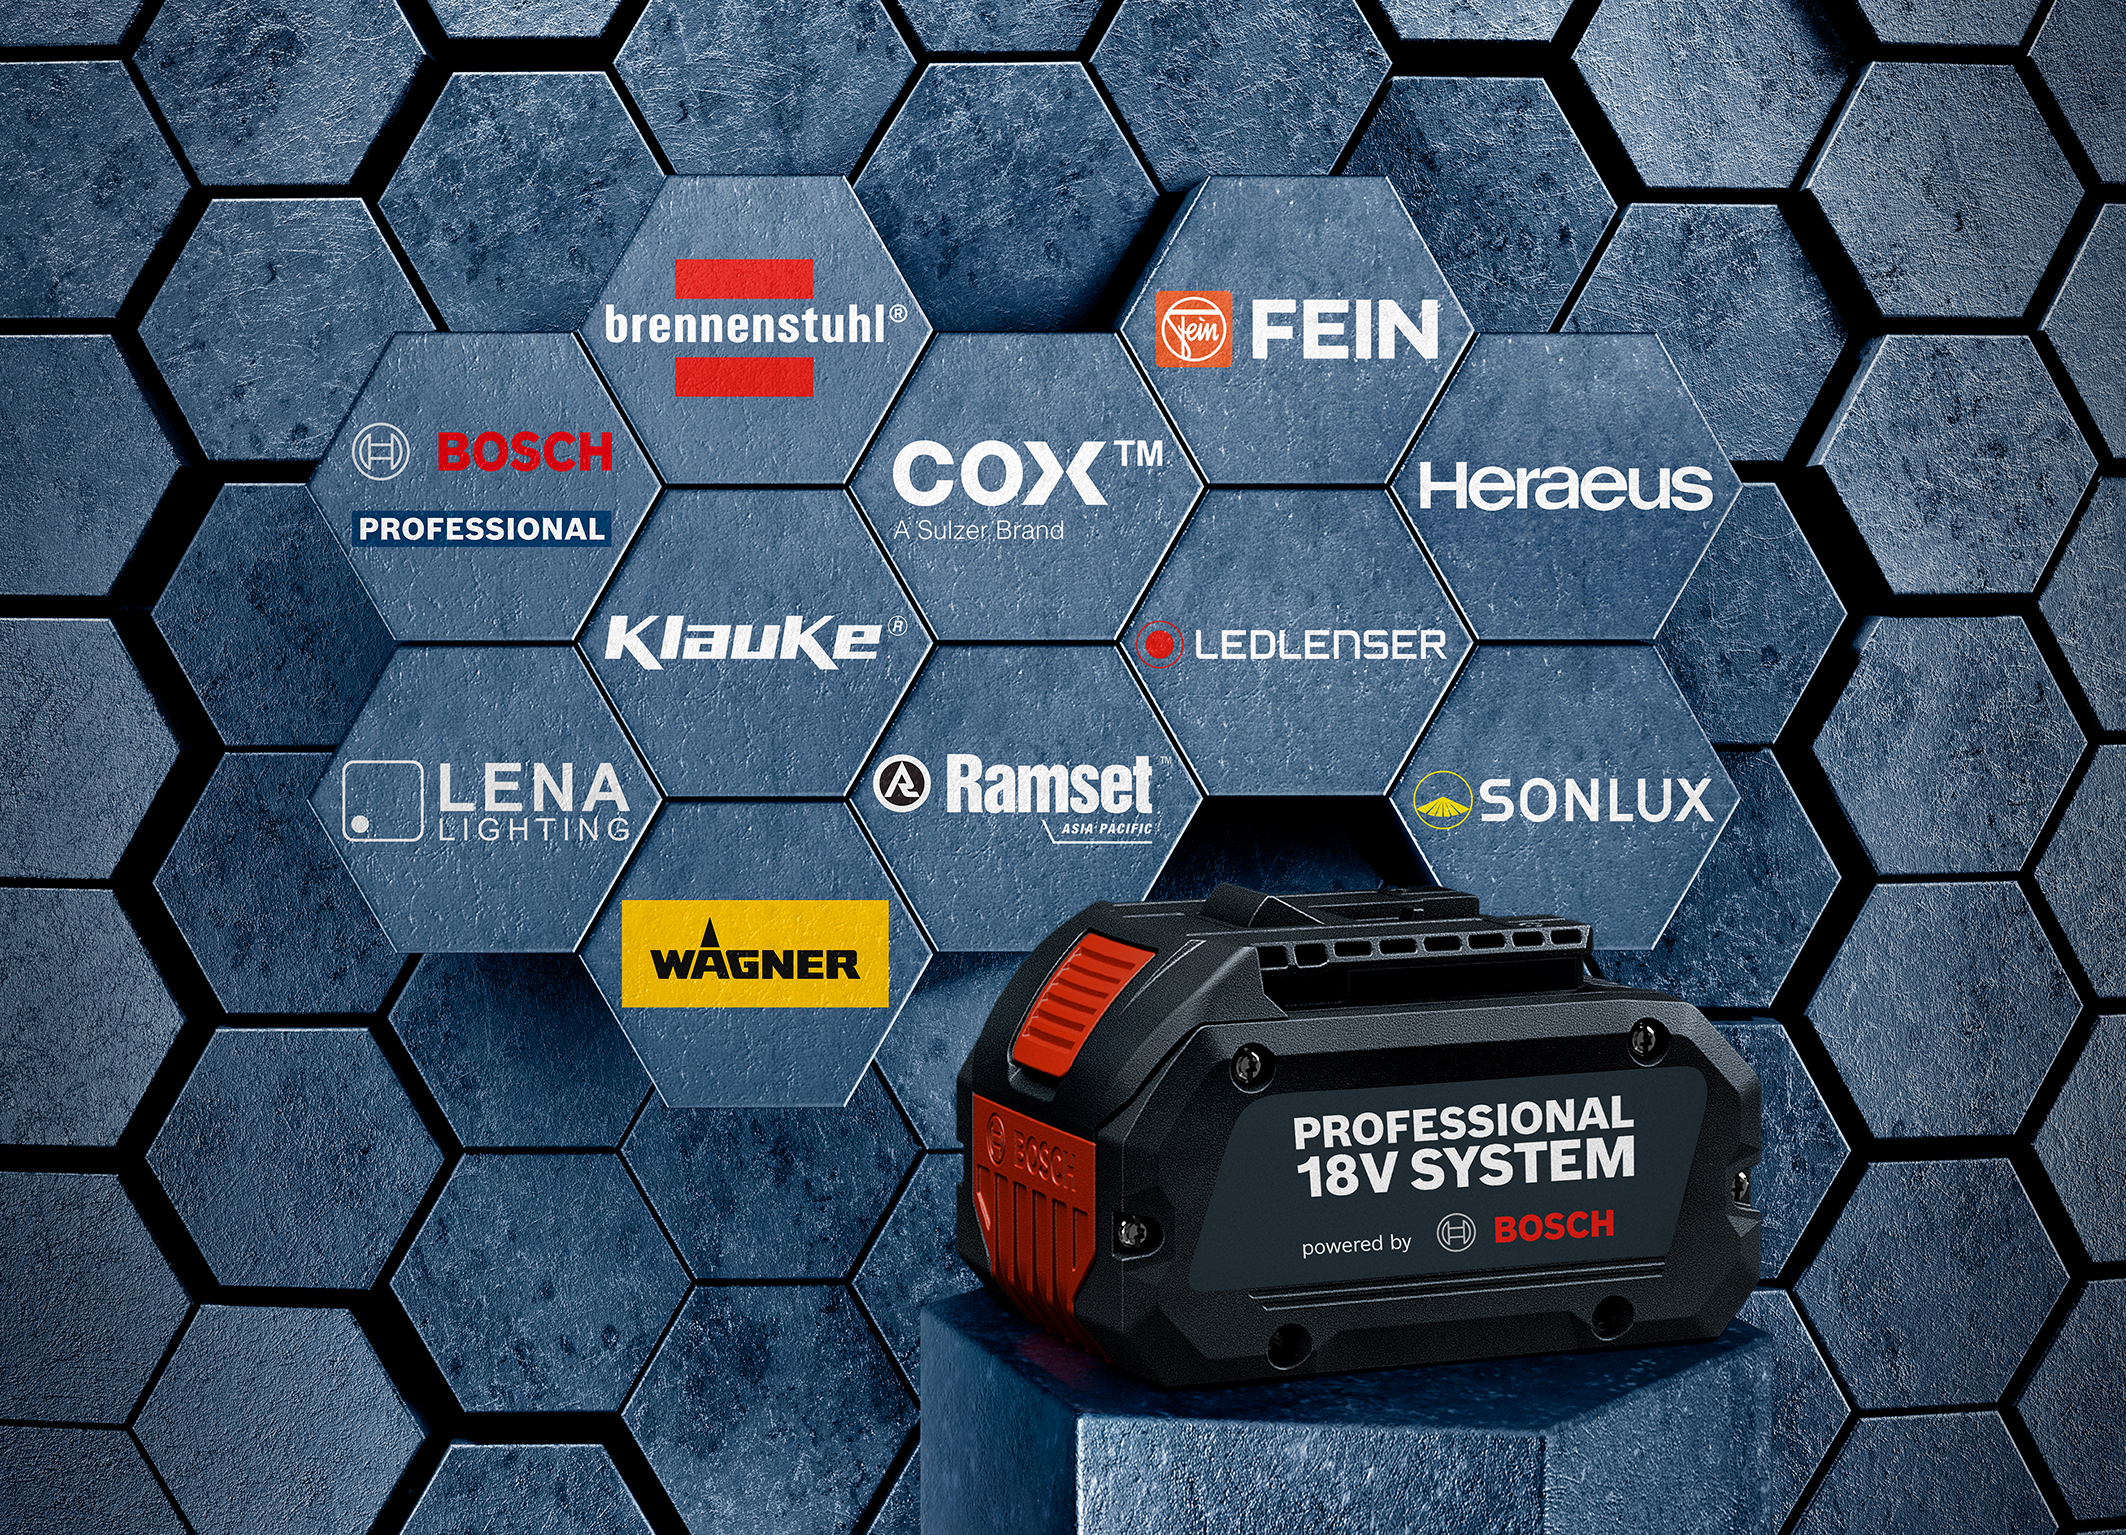 Fein and Heraeus extend range of applications: Further expansion of the Bosch Professional 18V System 